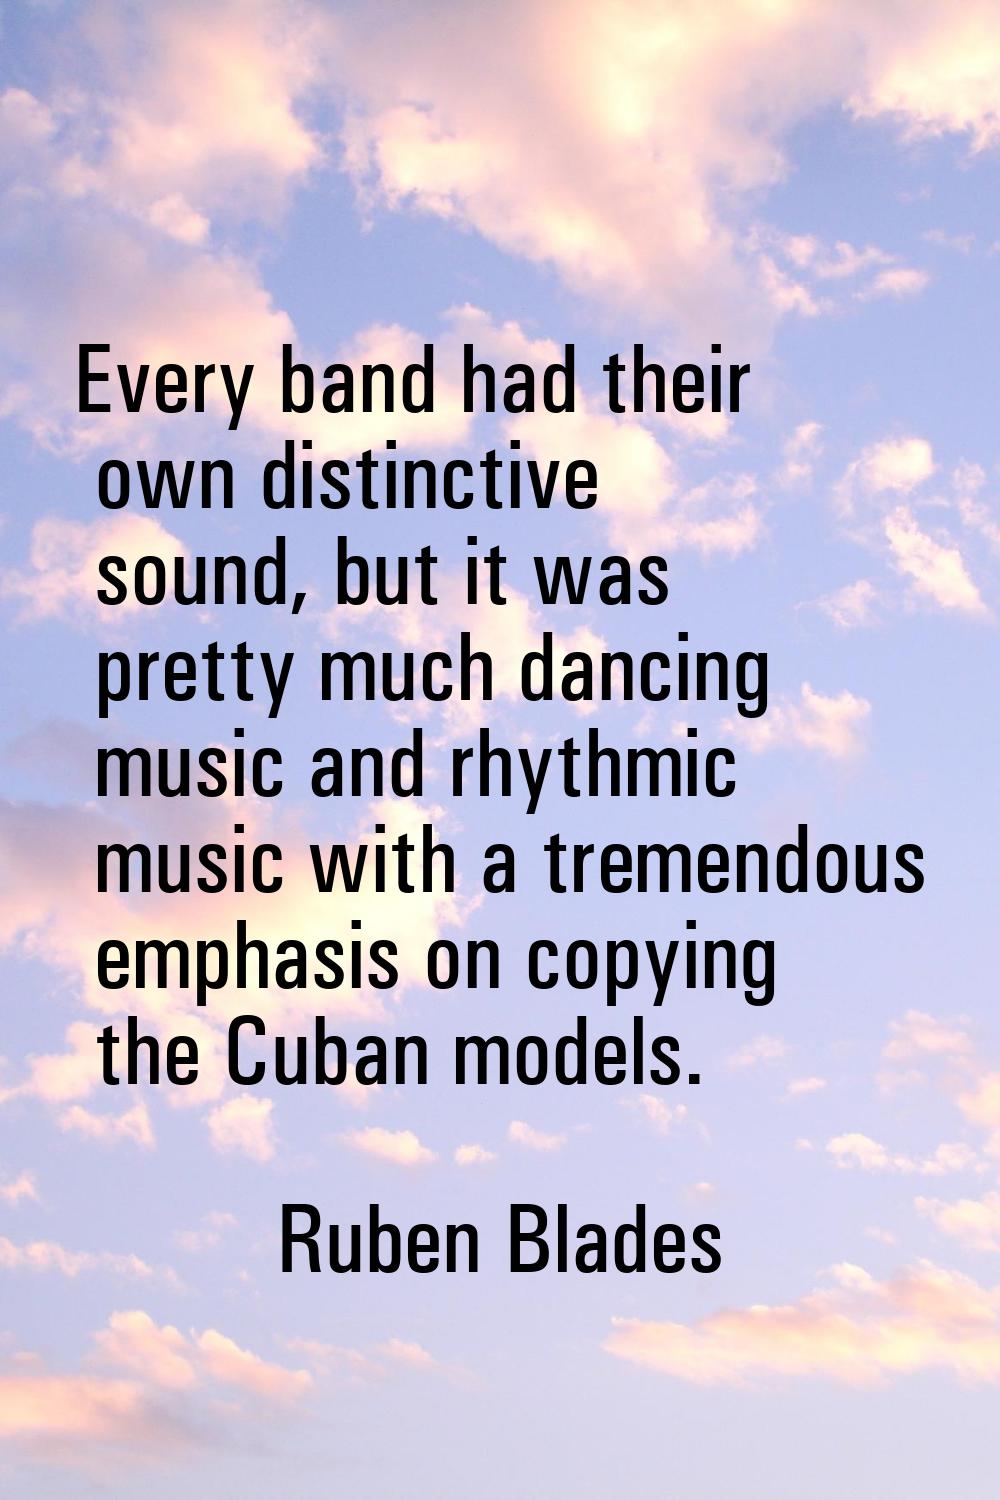 Every band had their own distinctive sound, but it was pretty much dancing music and rhythmic music